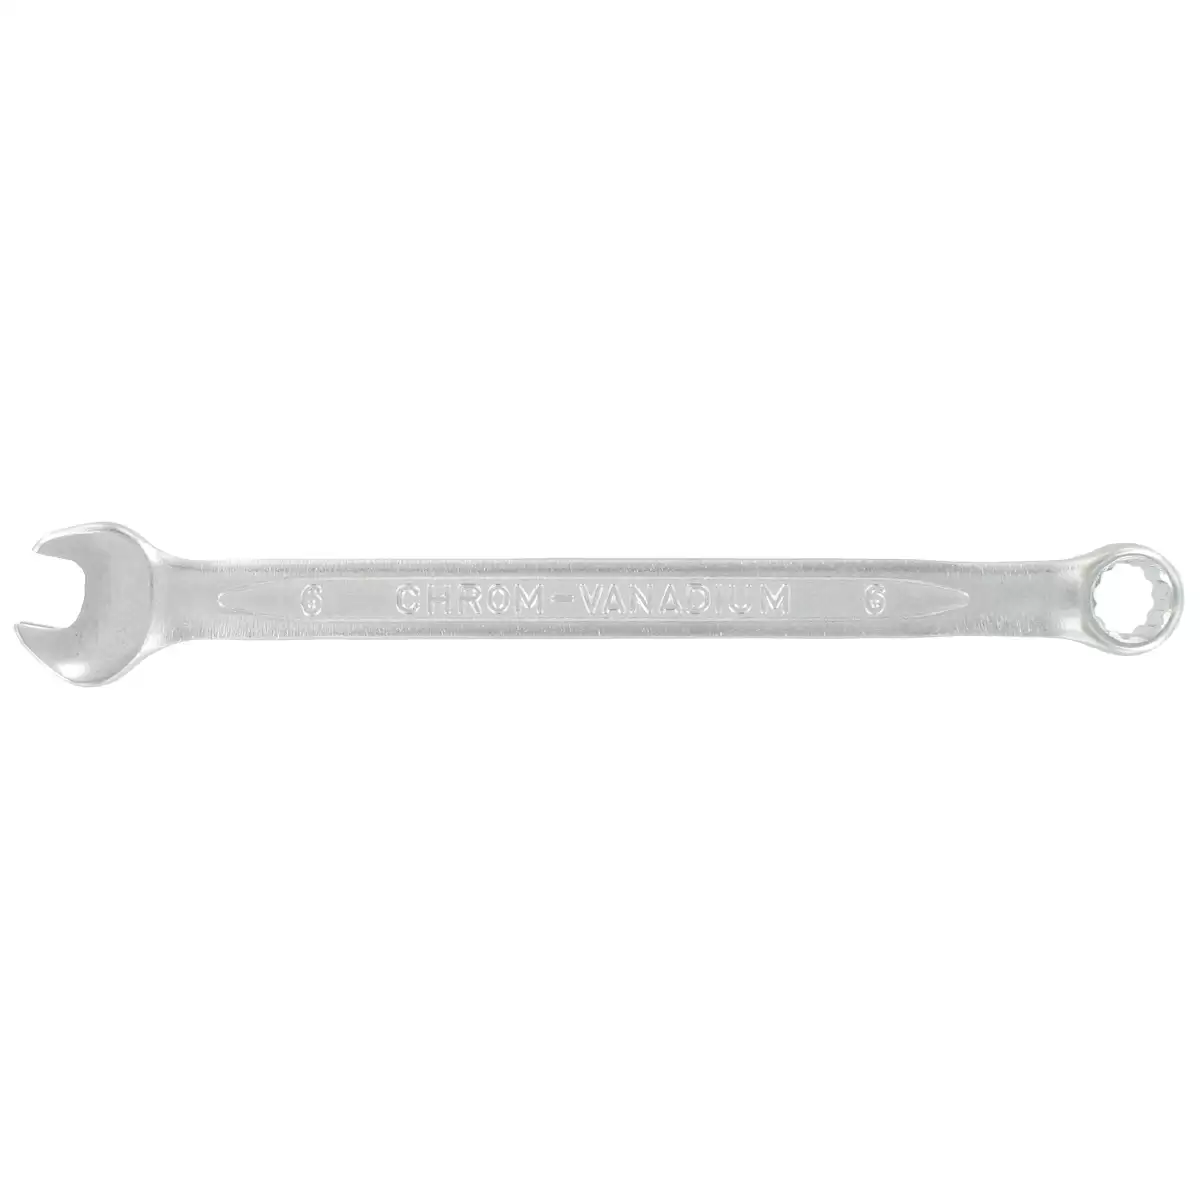 Combination Wrench 6mm - image